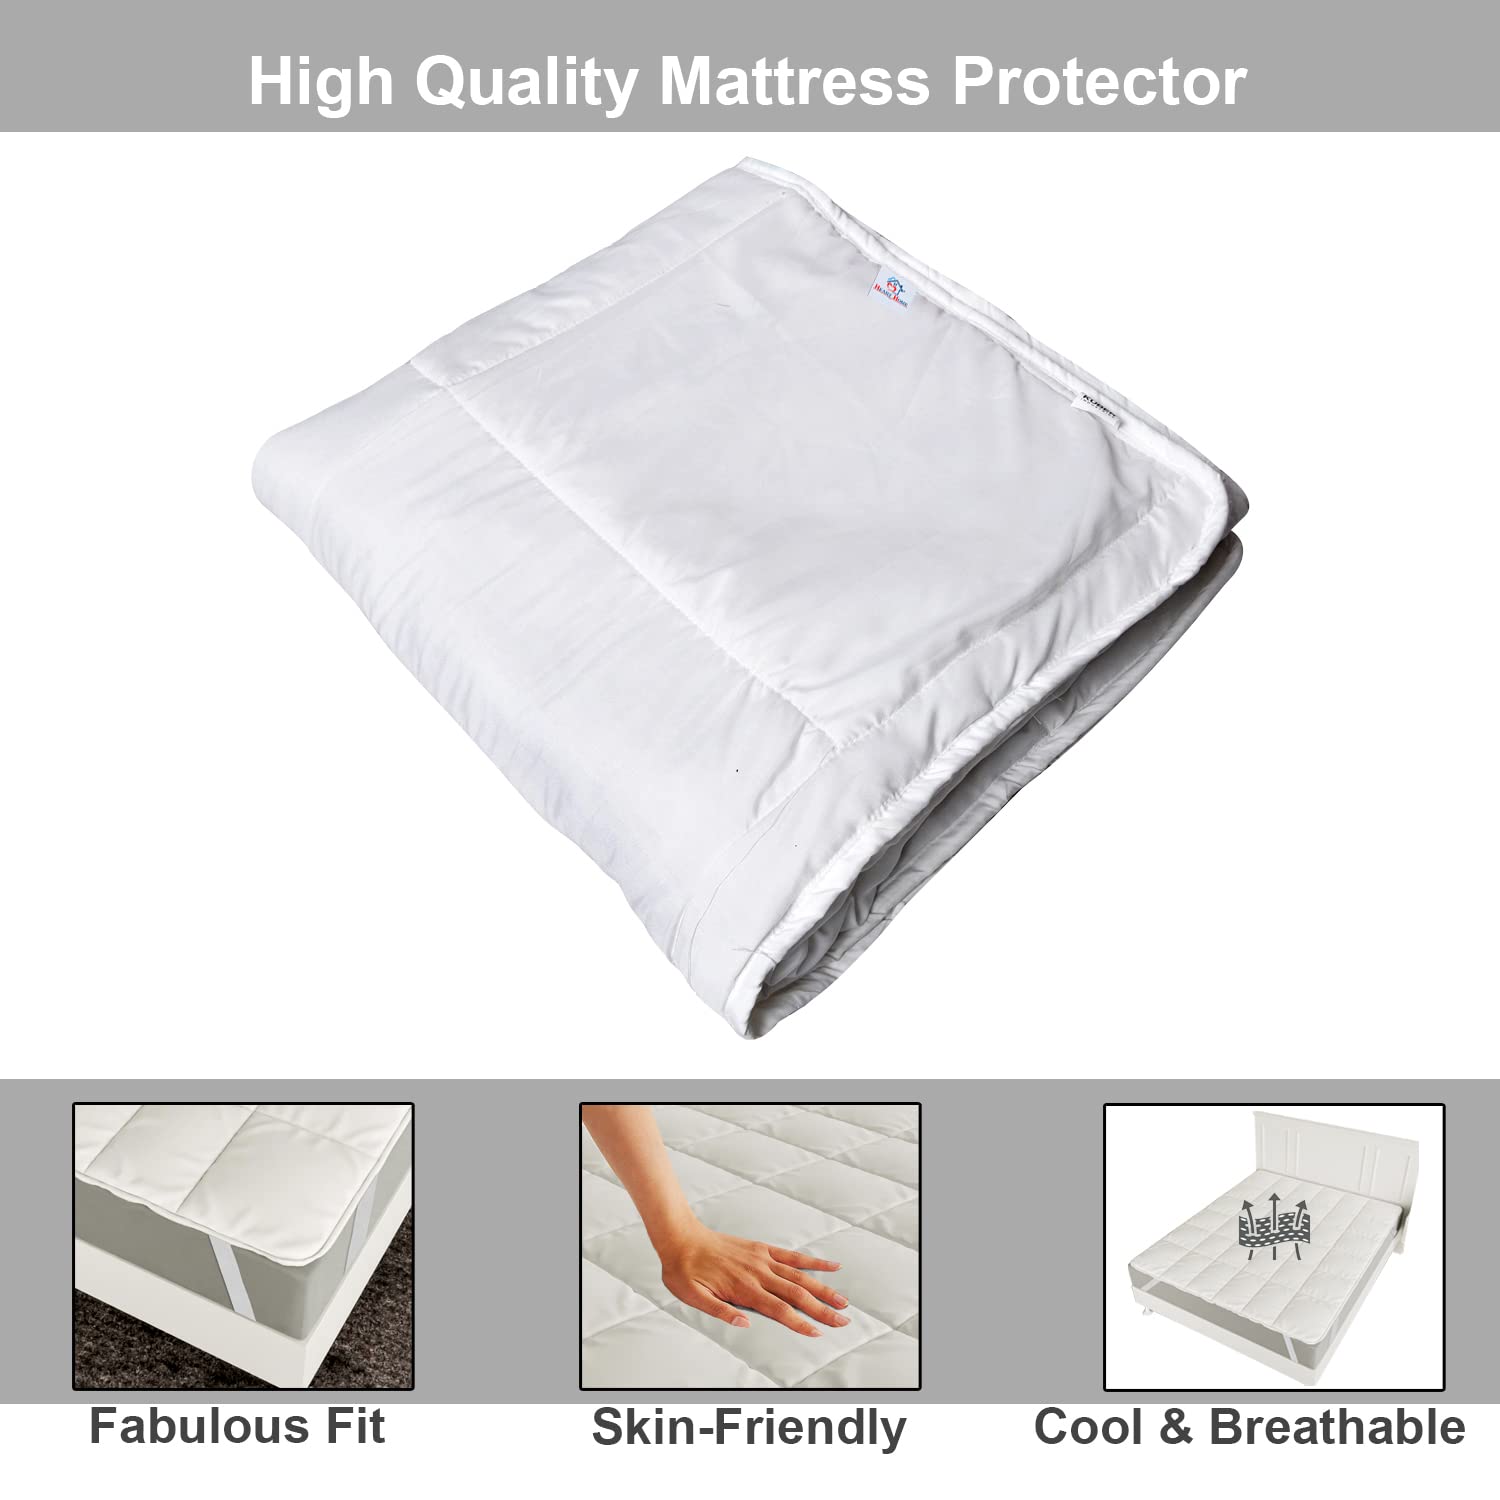 Heart Home Mattress Protector|Soft Cotton Breathable Mattress  Protector|Waterproof Mattress Protector|Quilted Cover with Elastic Band  Straps|60x78